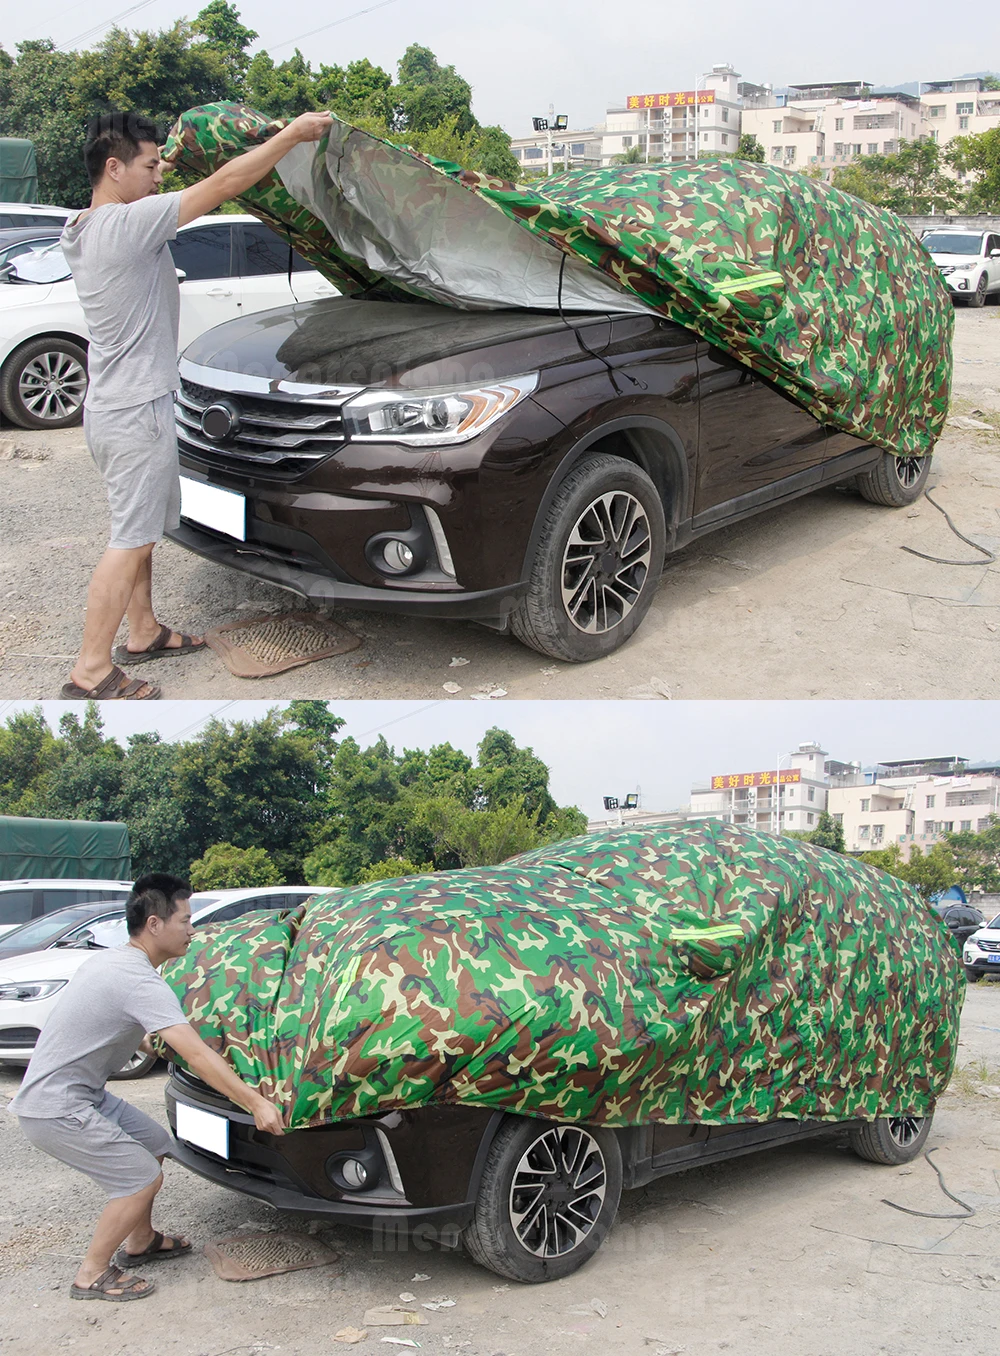 waterproof car cover Camouflage Car Cover For Mitsubishi Outlander SUV Anti-UV Sun Shade Rain Snow Dust Resistant Waterproof Cover best car sun shade